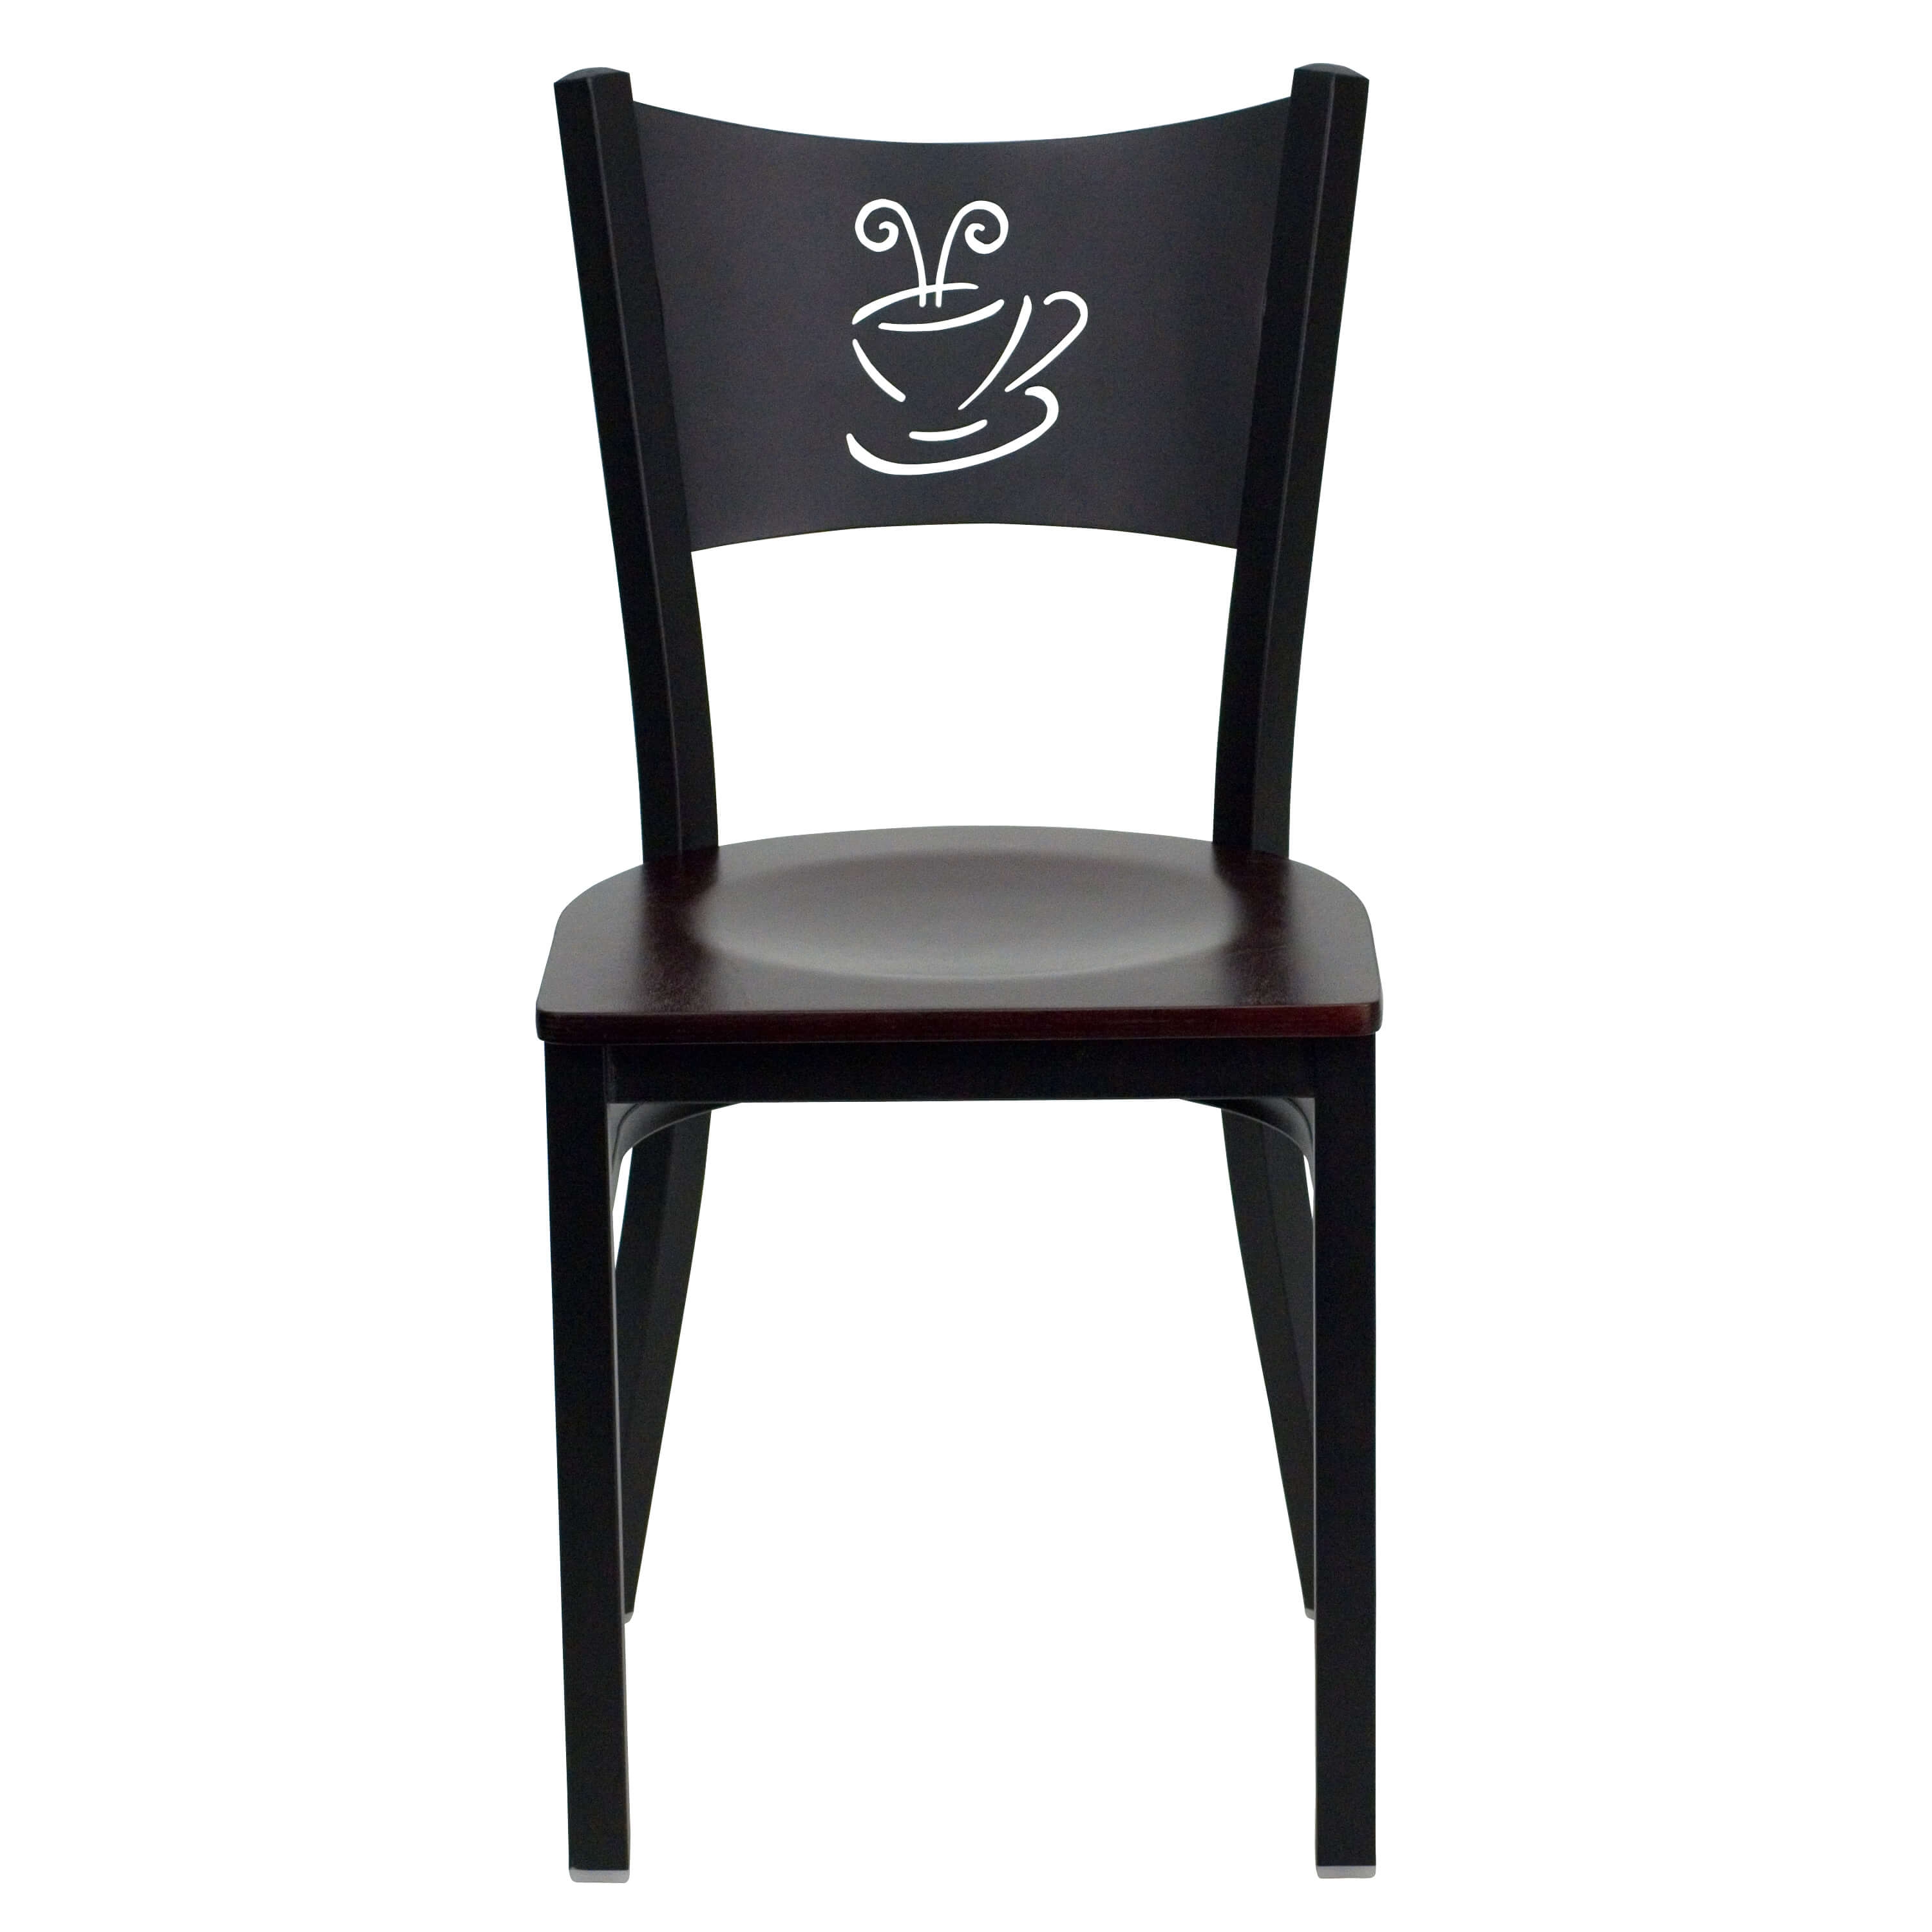 Coffe back casual dining chair front view